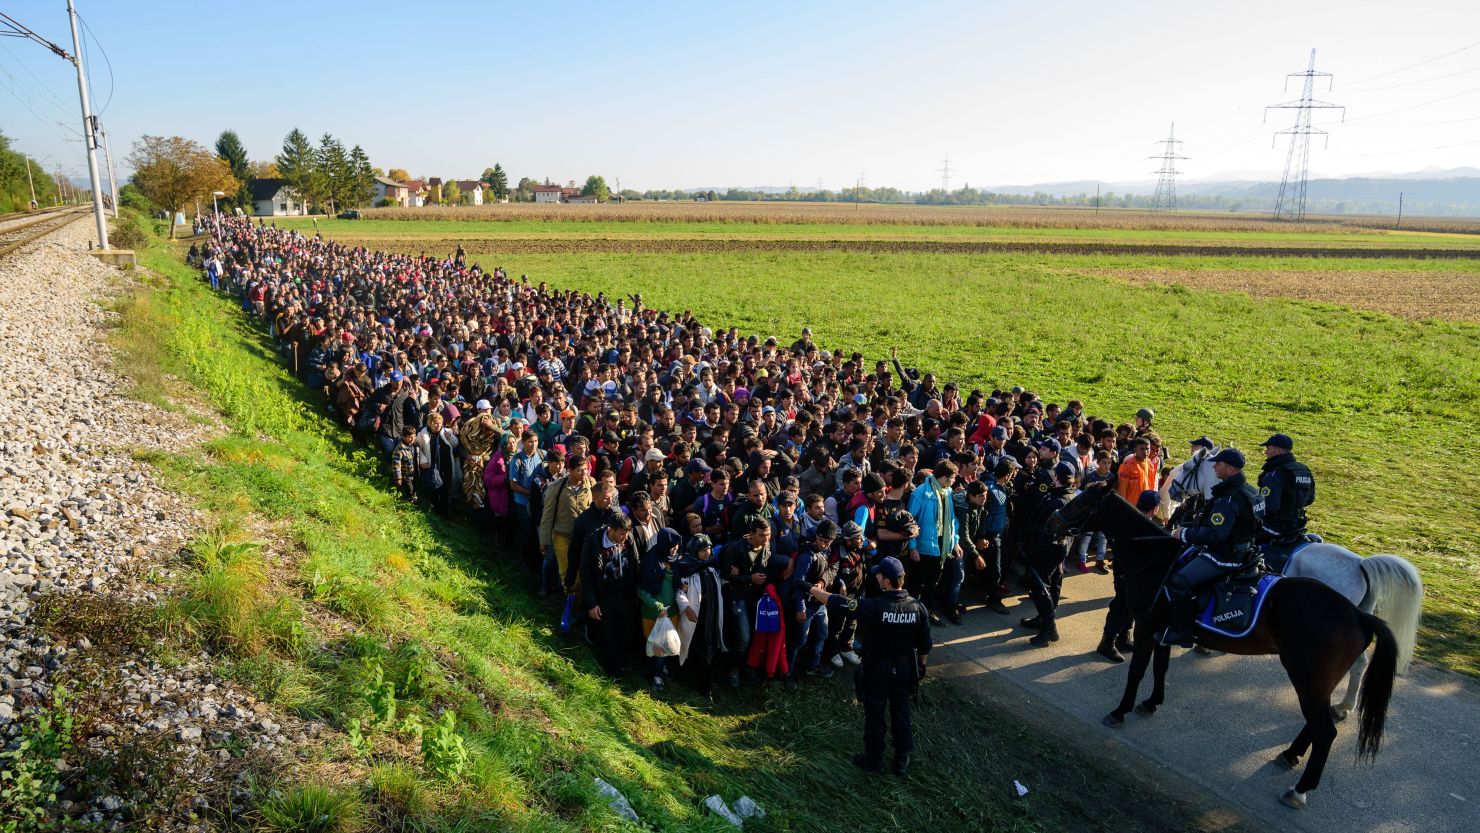 Police escort migrants toward a refugee center after crossing the Croatian-Slovenian border in 2015.